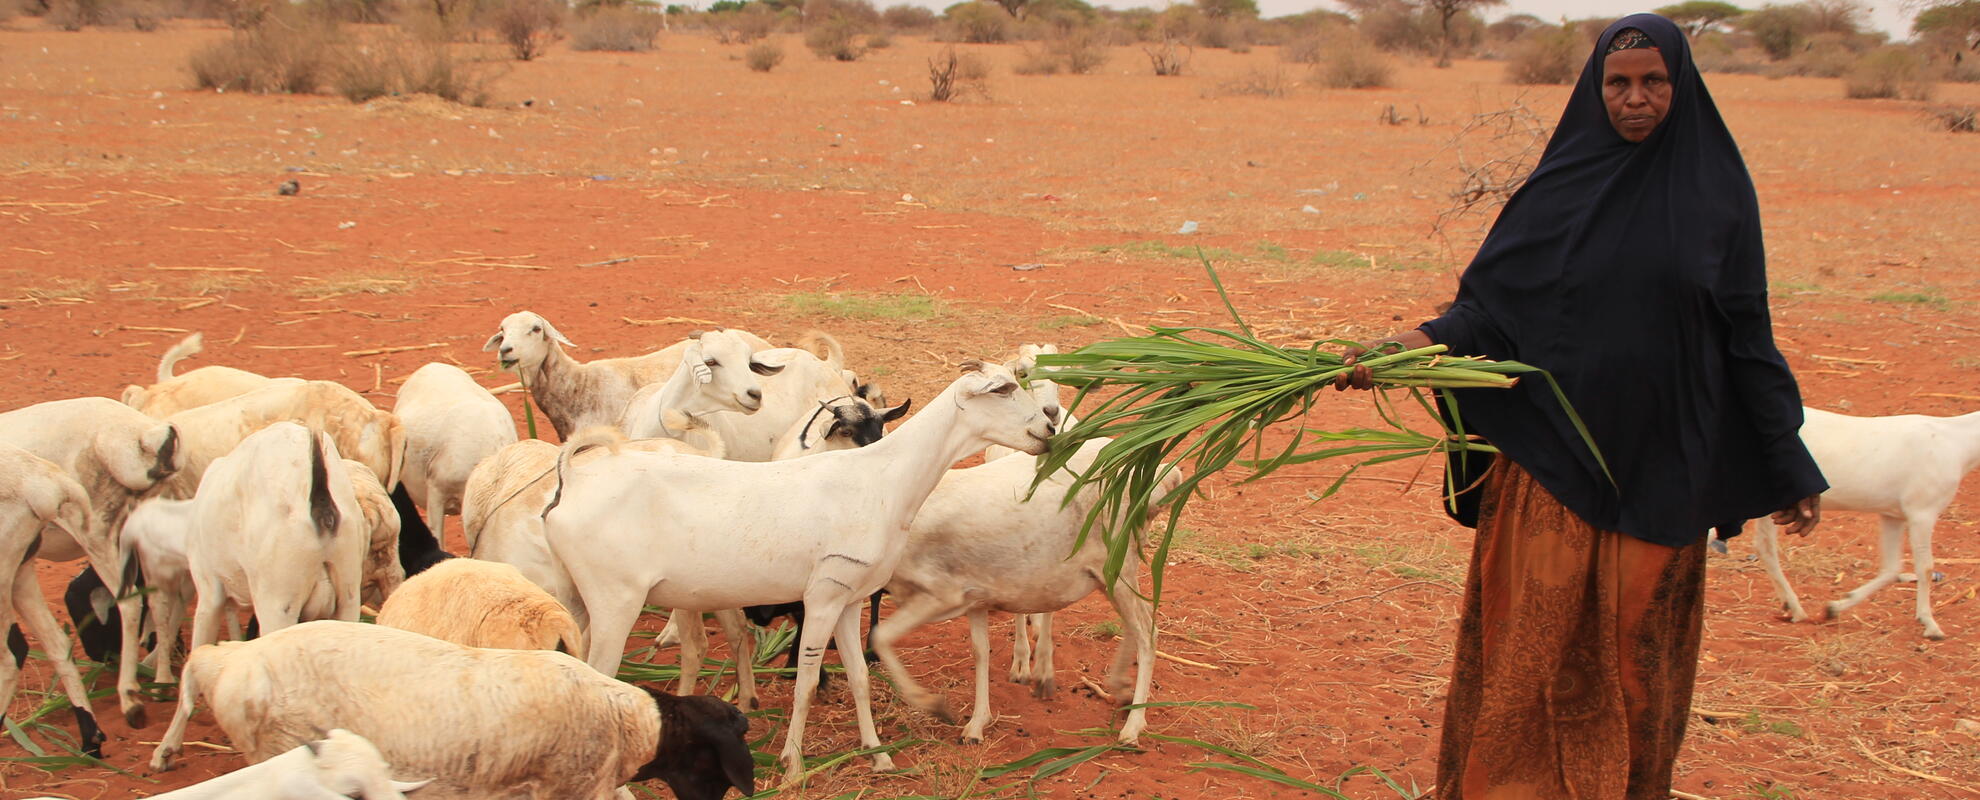 A member of the Muungano Makaror Farming group in Wajir feed their livestock with fodder harvested from their farm (ILRI / Dorine Odongo).